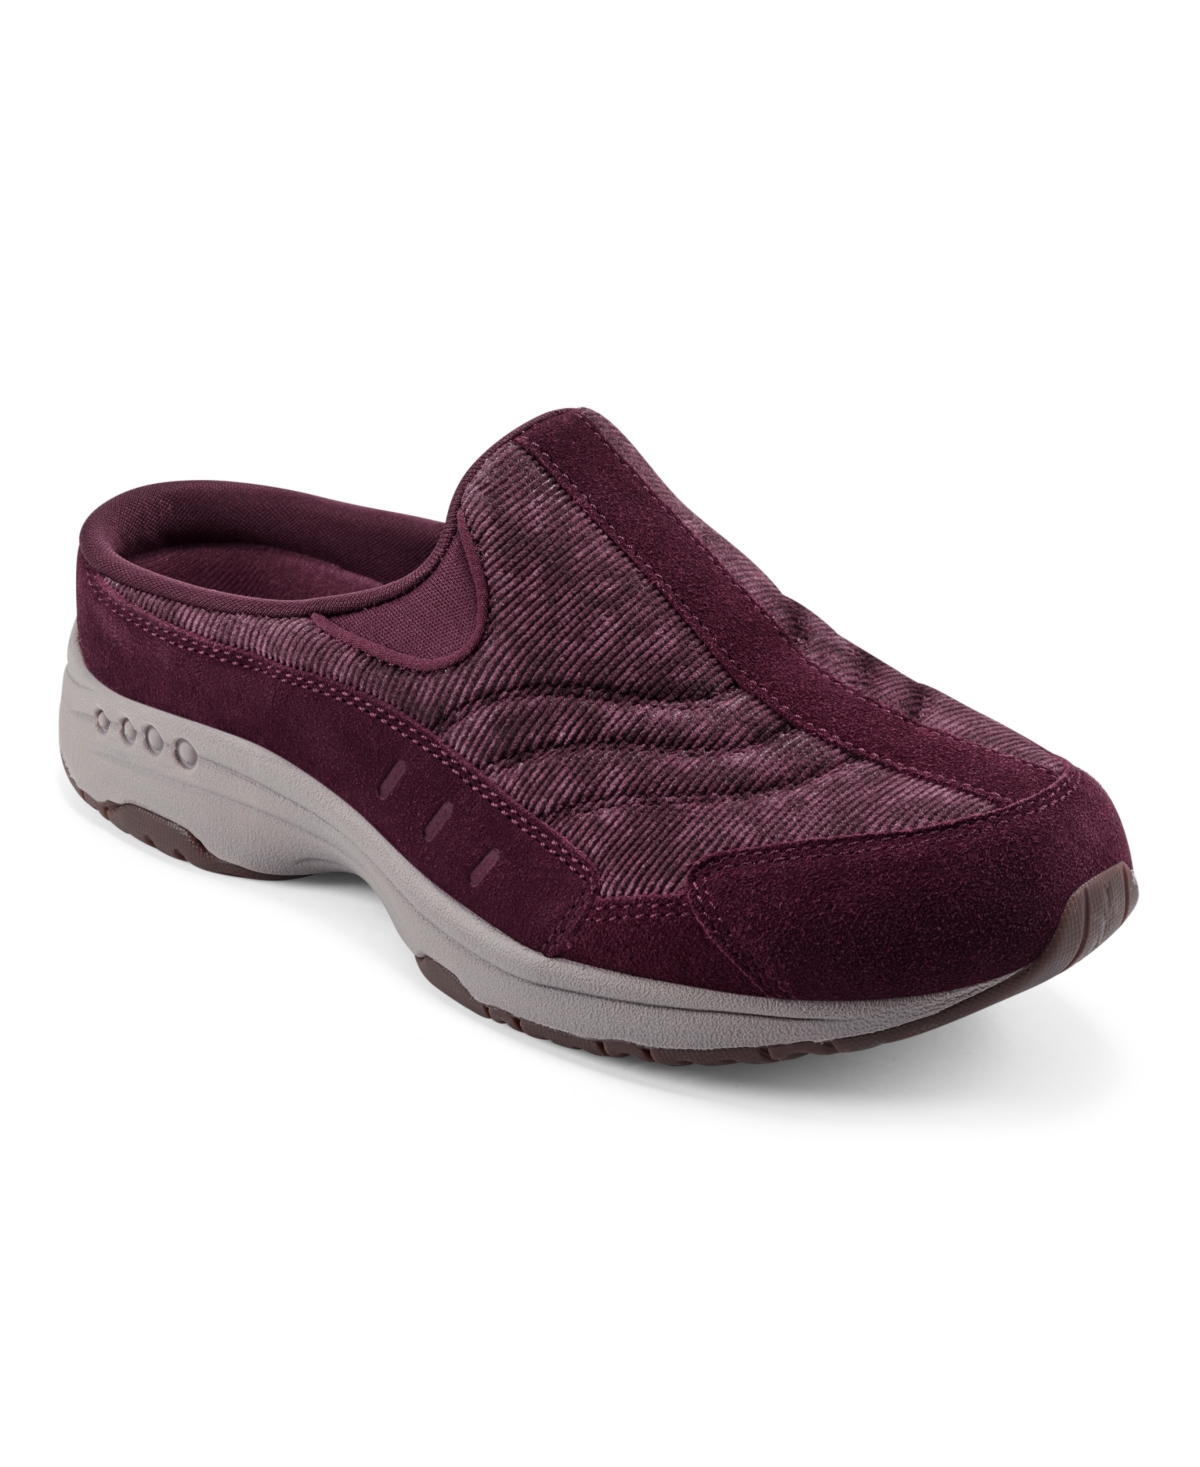 Easy Spirit Women's Traveltime Round Toe Casual Slip-on Mules In Wine Suede,wine Corduroy- Suede,textil